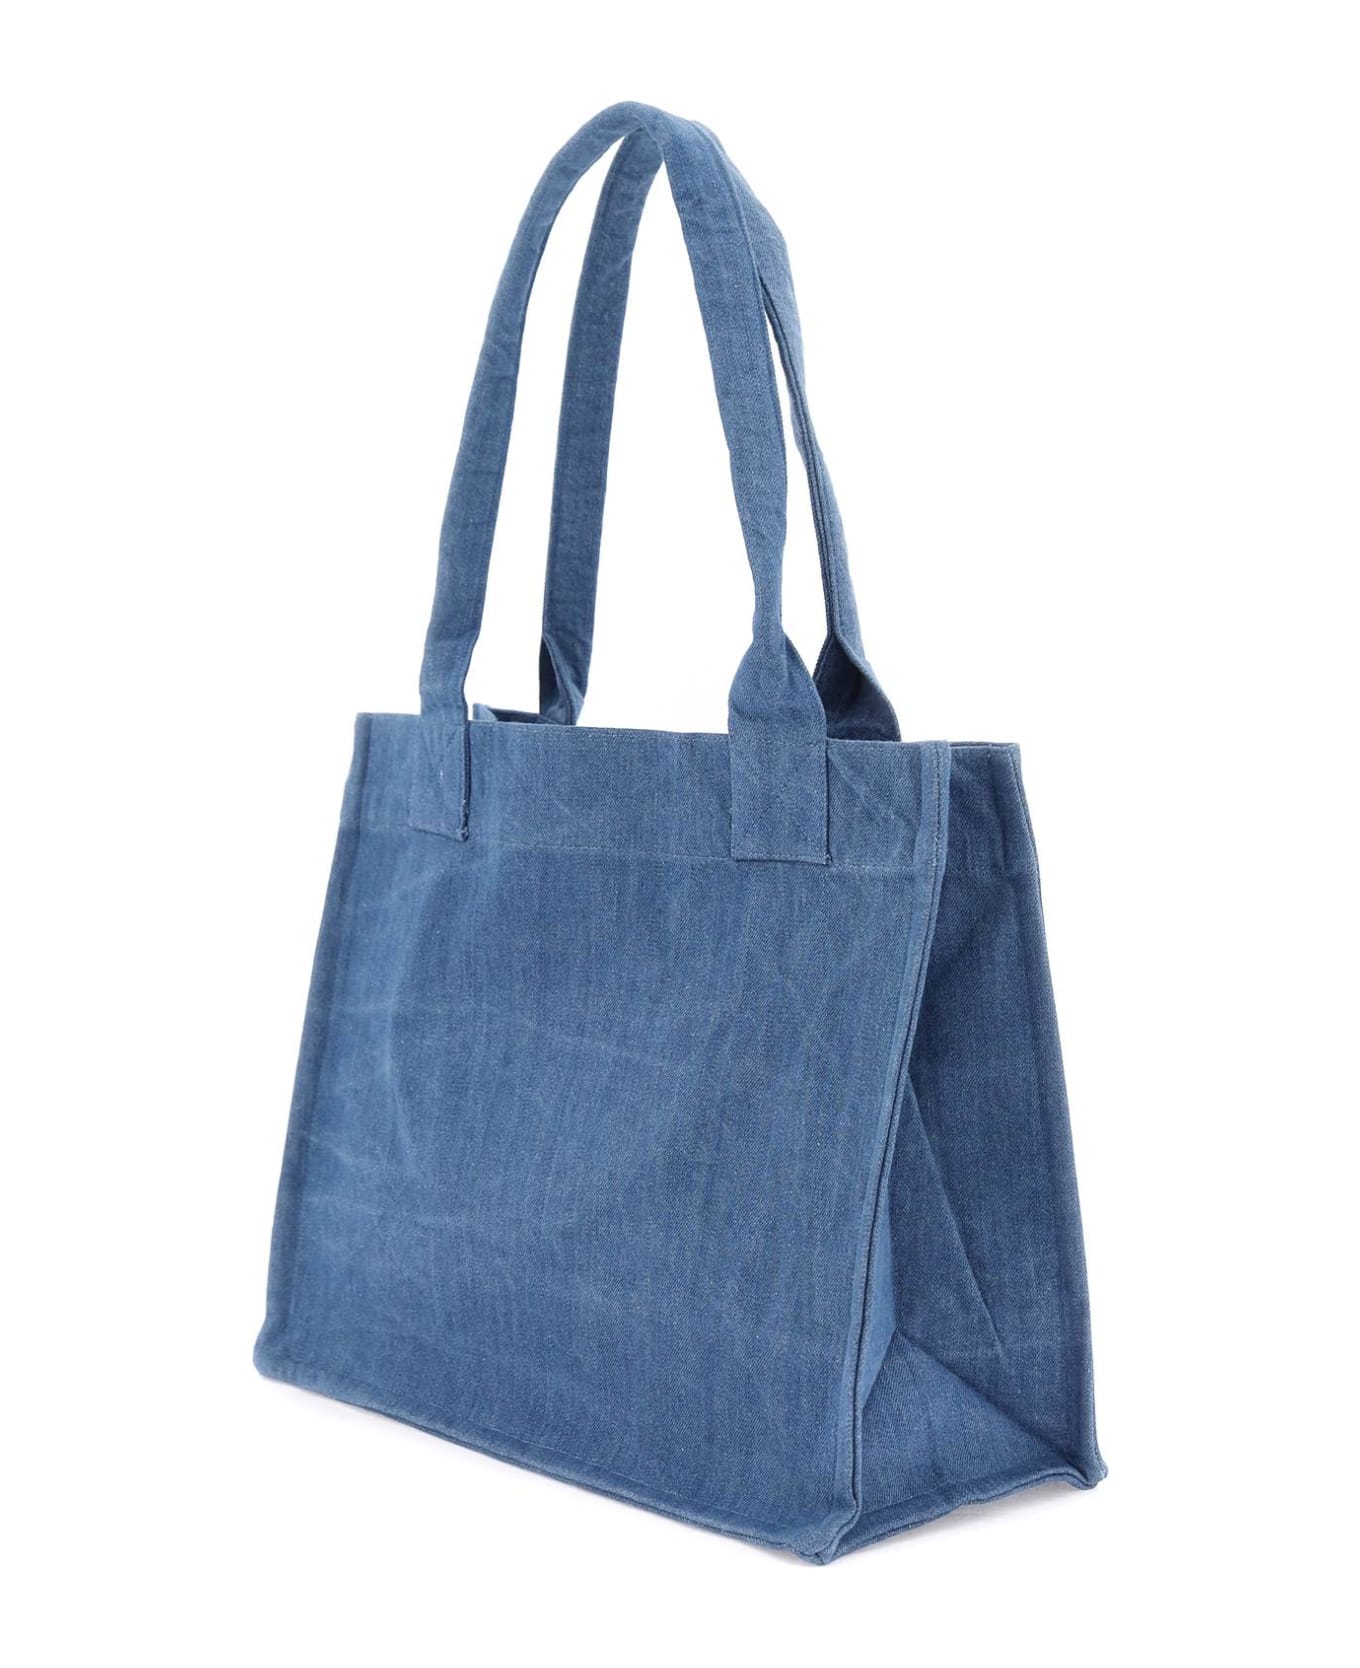 Ganni 'easy' Shopping Bag In Blue Recycled Cotton - DENIM (Blue) トートバッグ